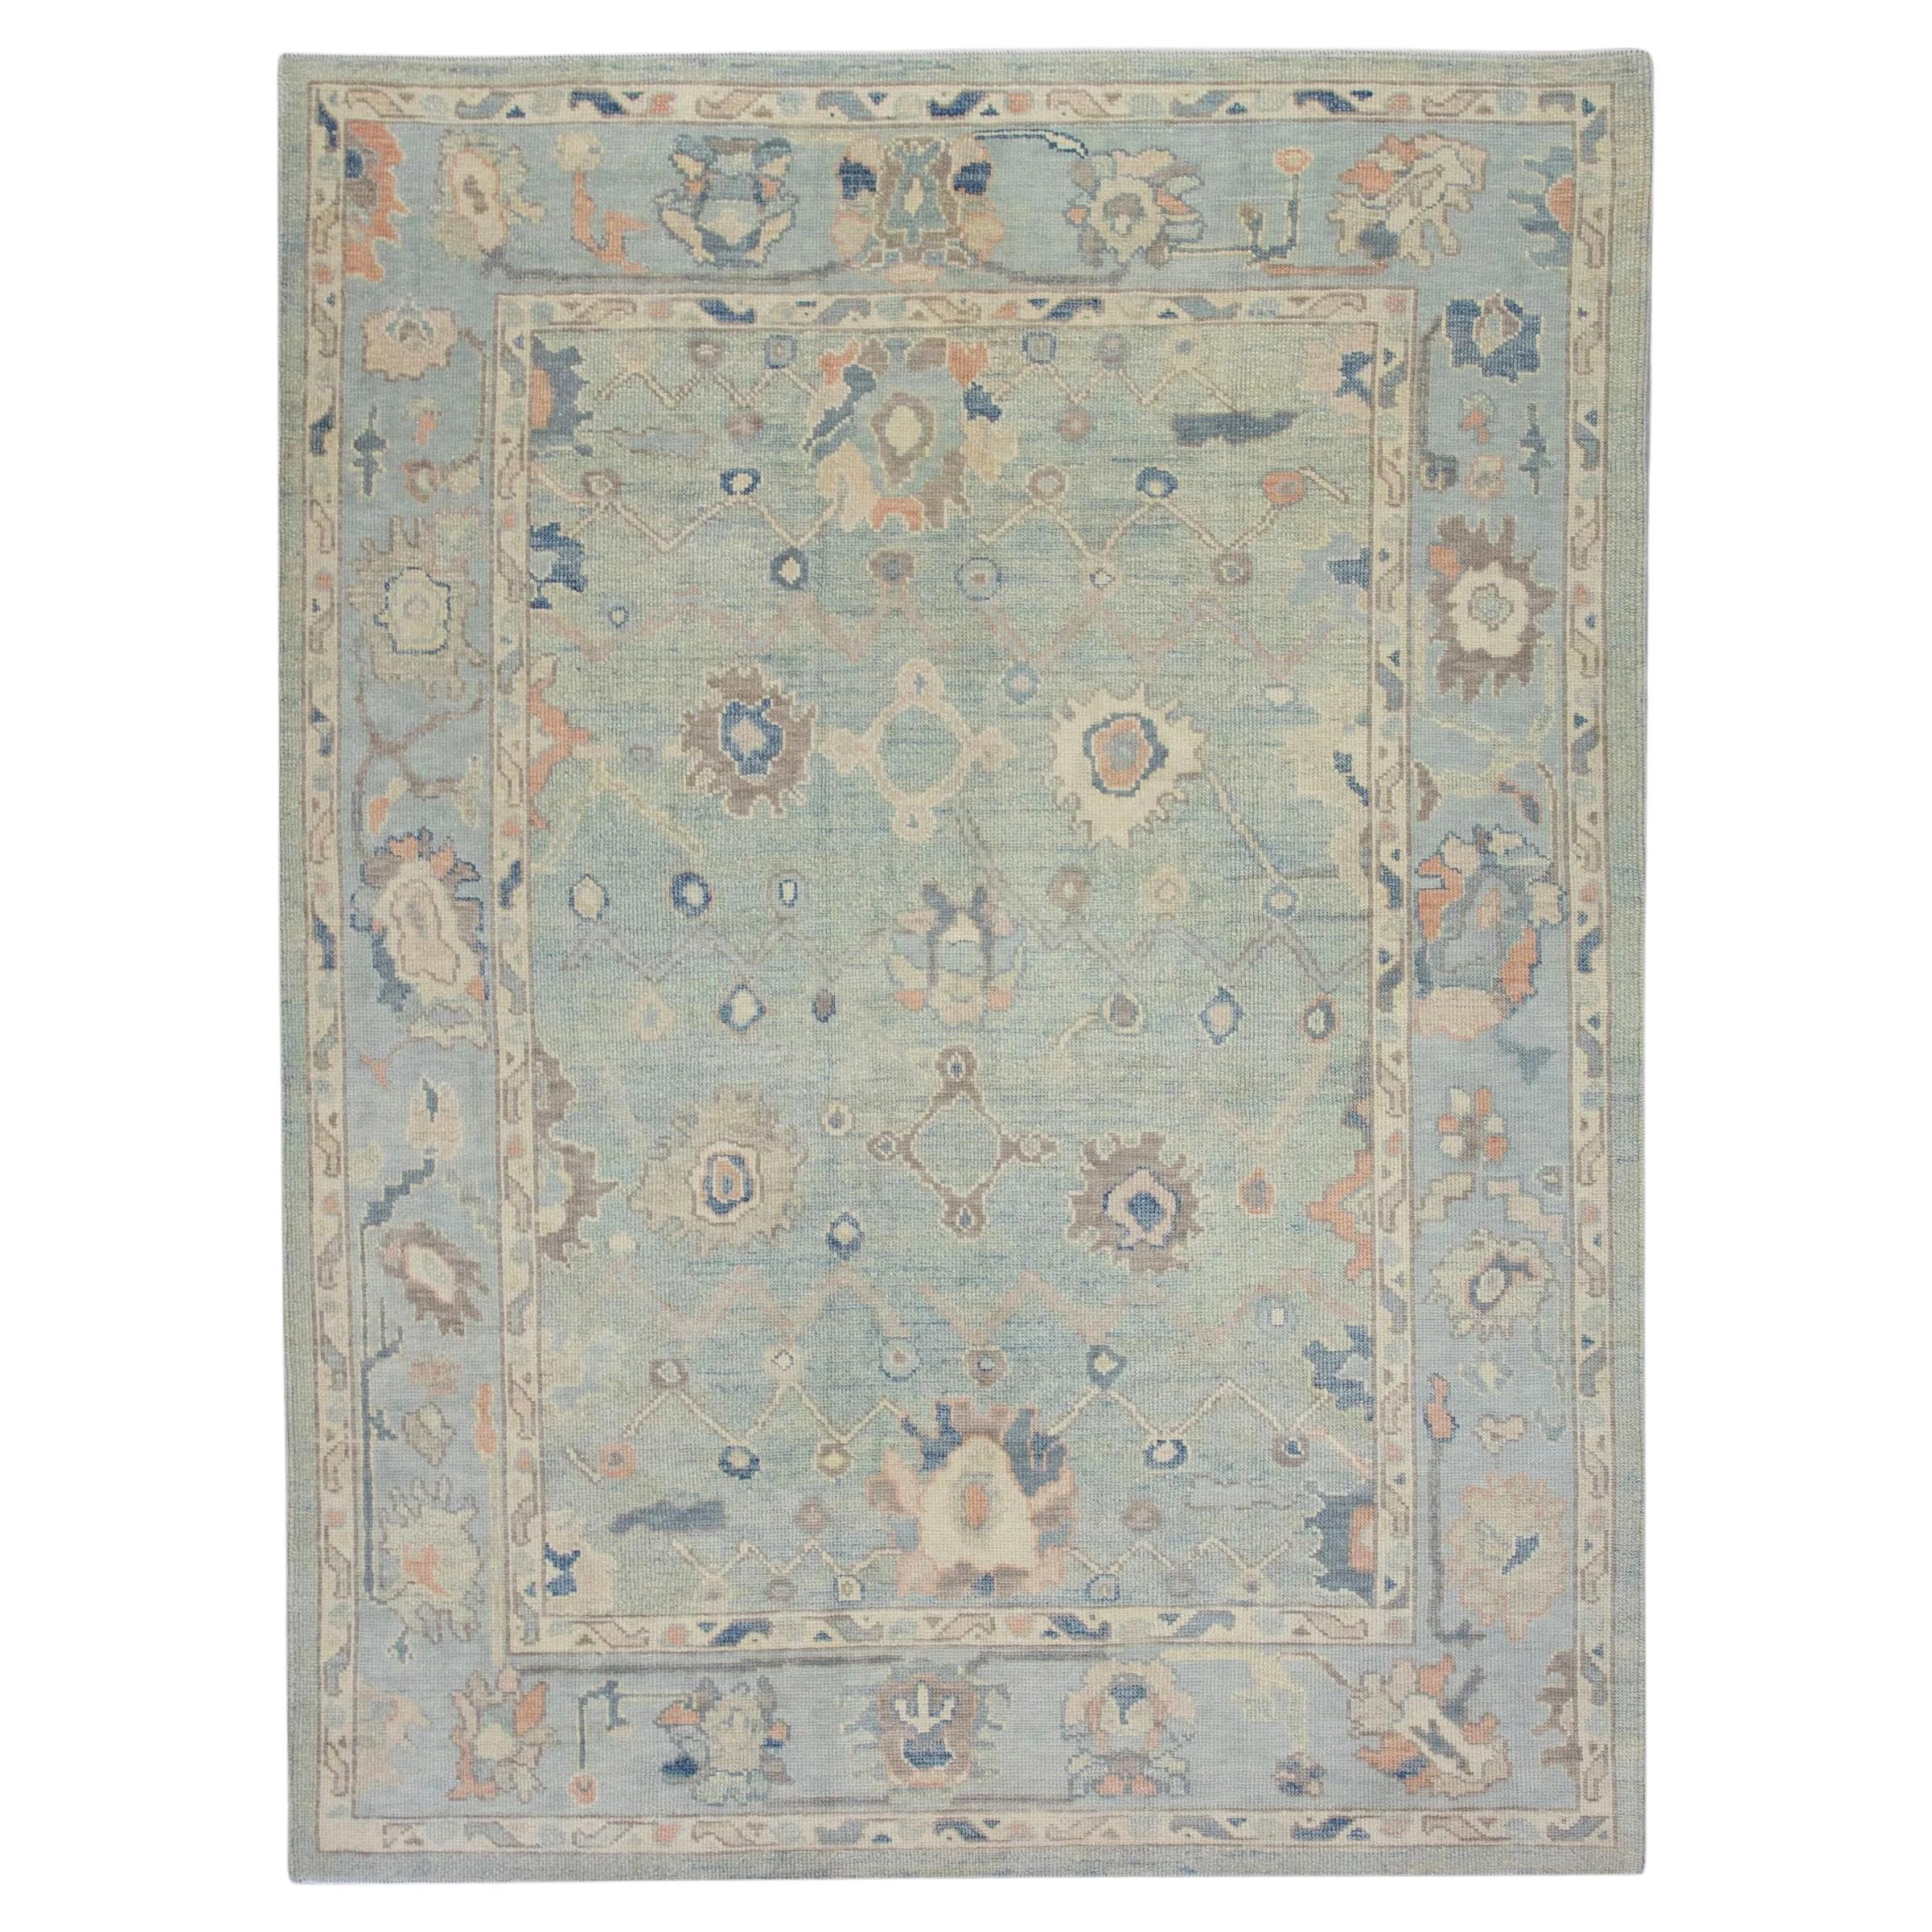 Blue and Salmon Handwoven Wool Turkish Oushak Rug in Floral Design 6'5" x 8'11" For Sale